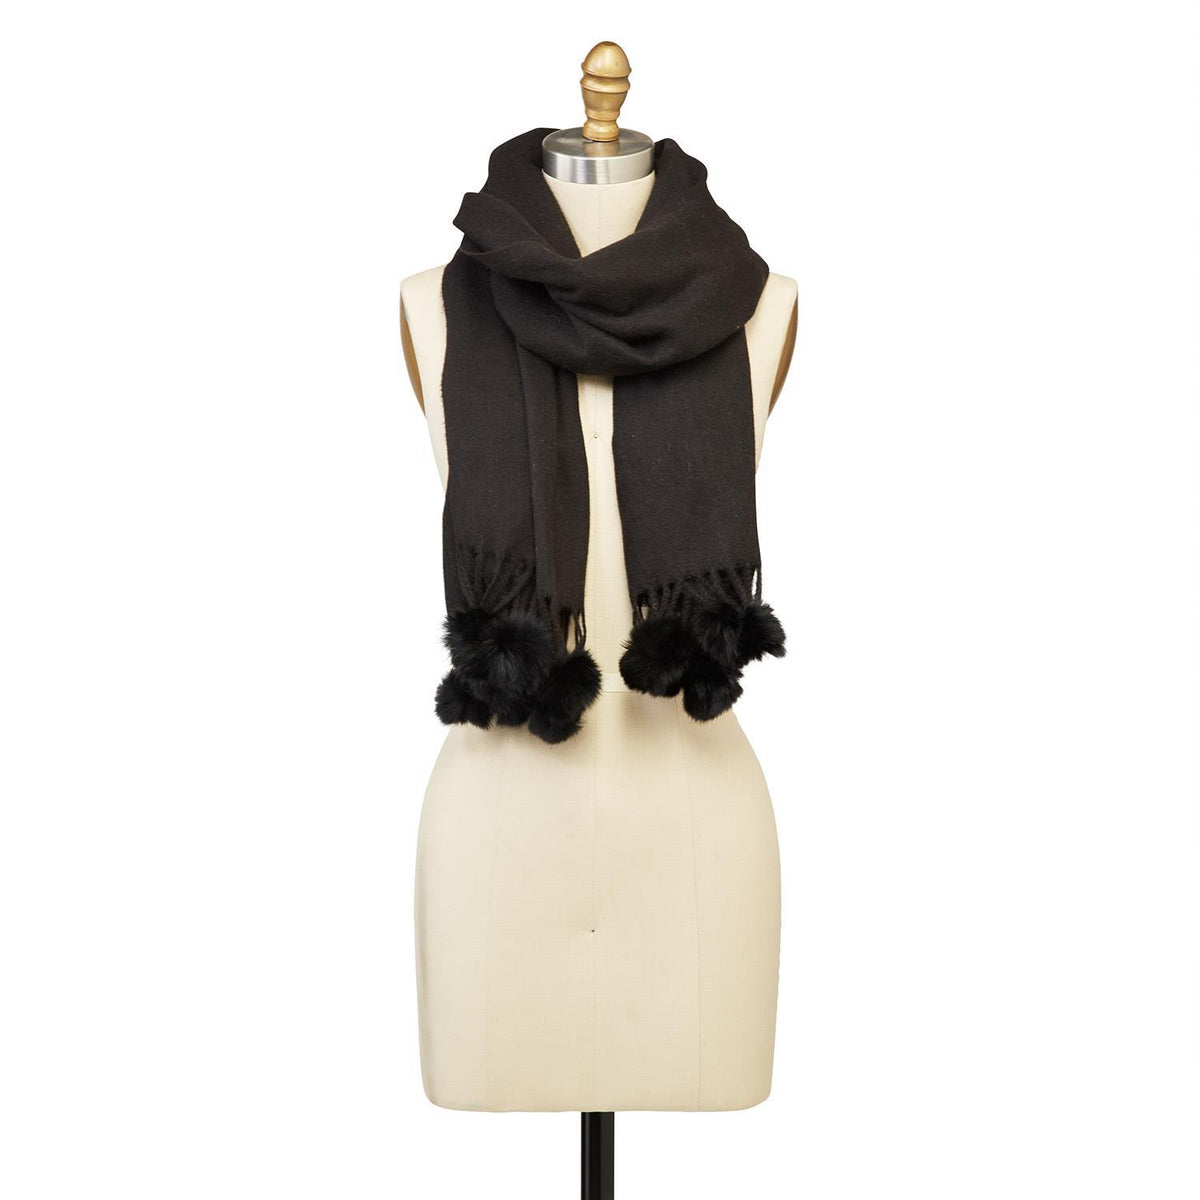 Cashmere-Like Scarf with Tassels and Fur Pom Poms